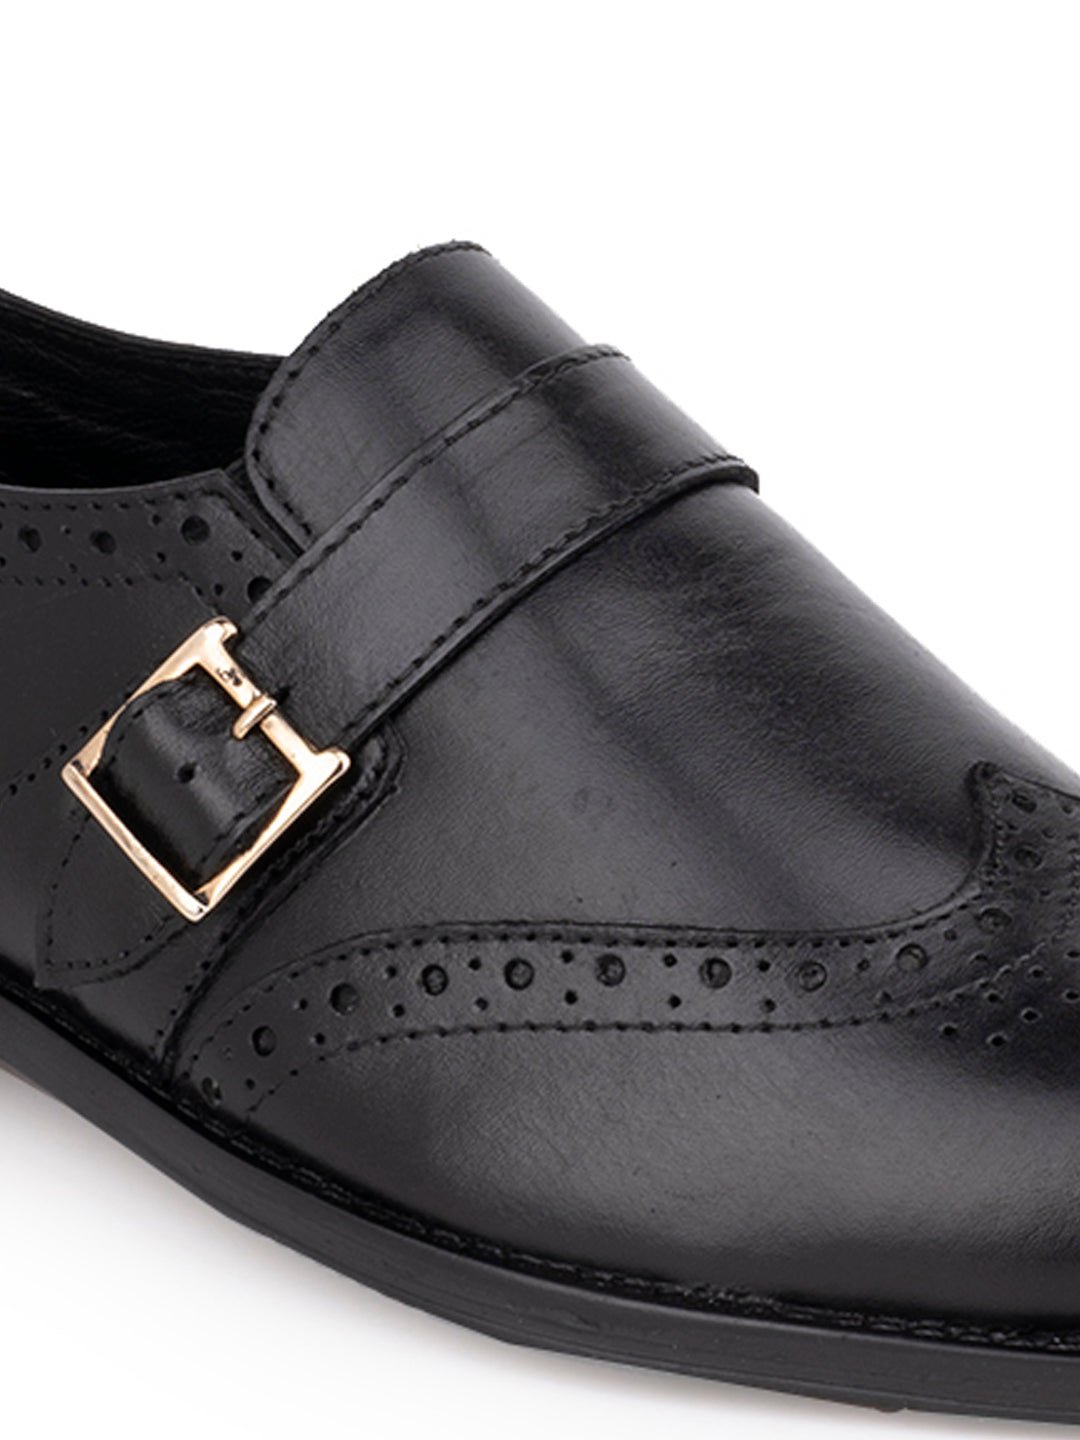 Men Black Perforated Monk Formal Shoes